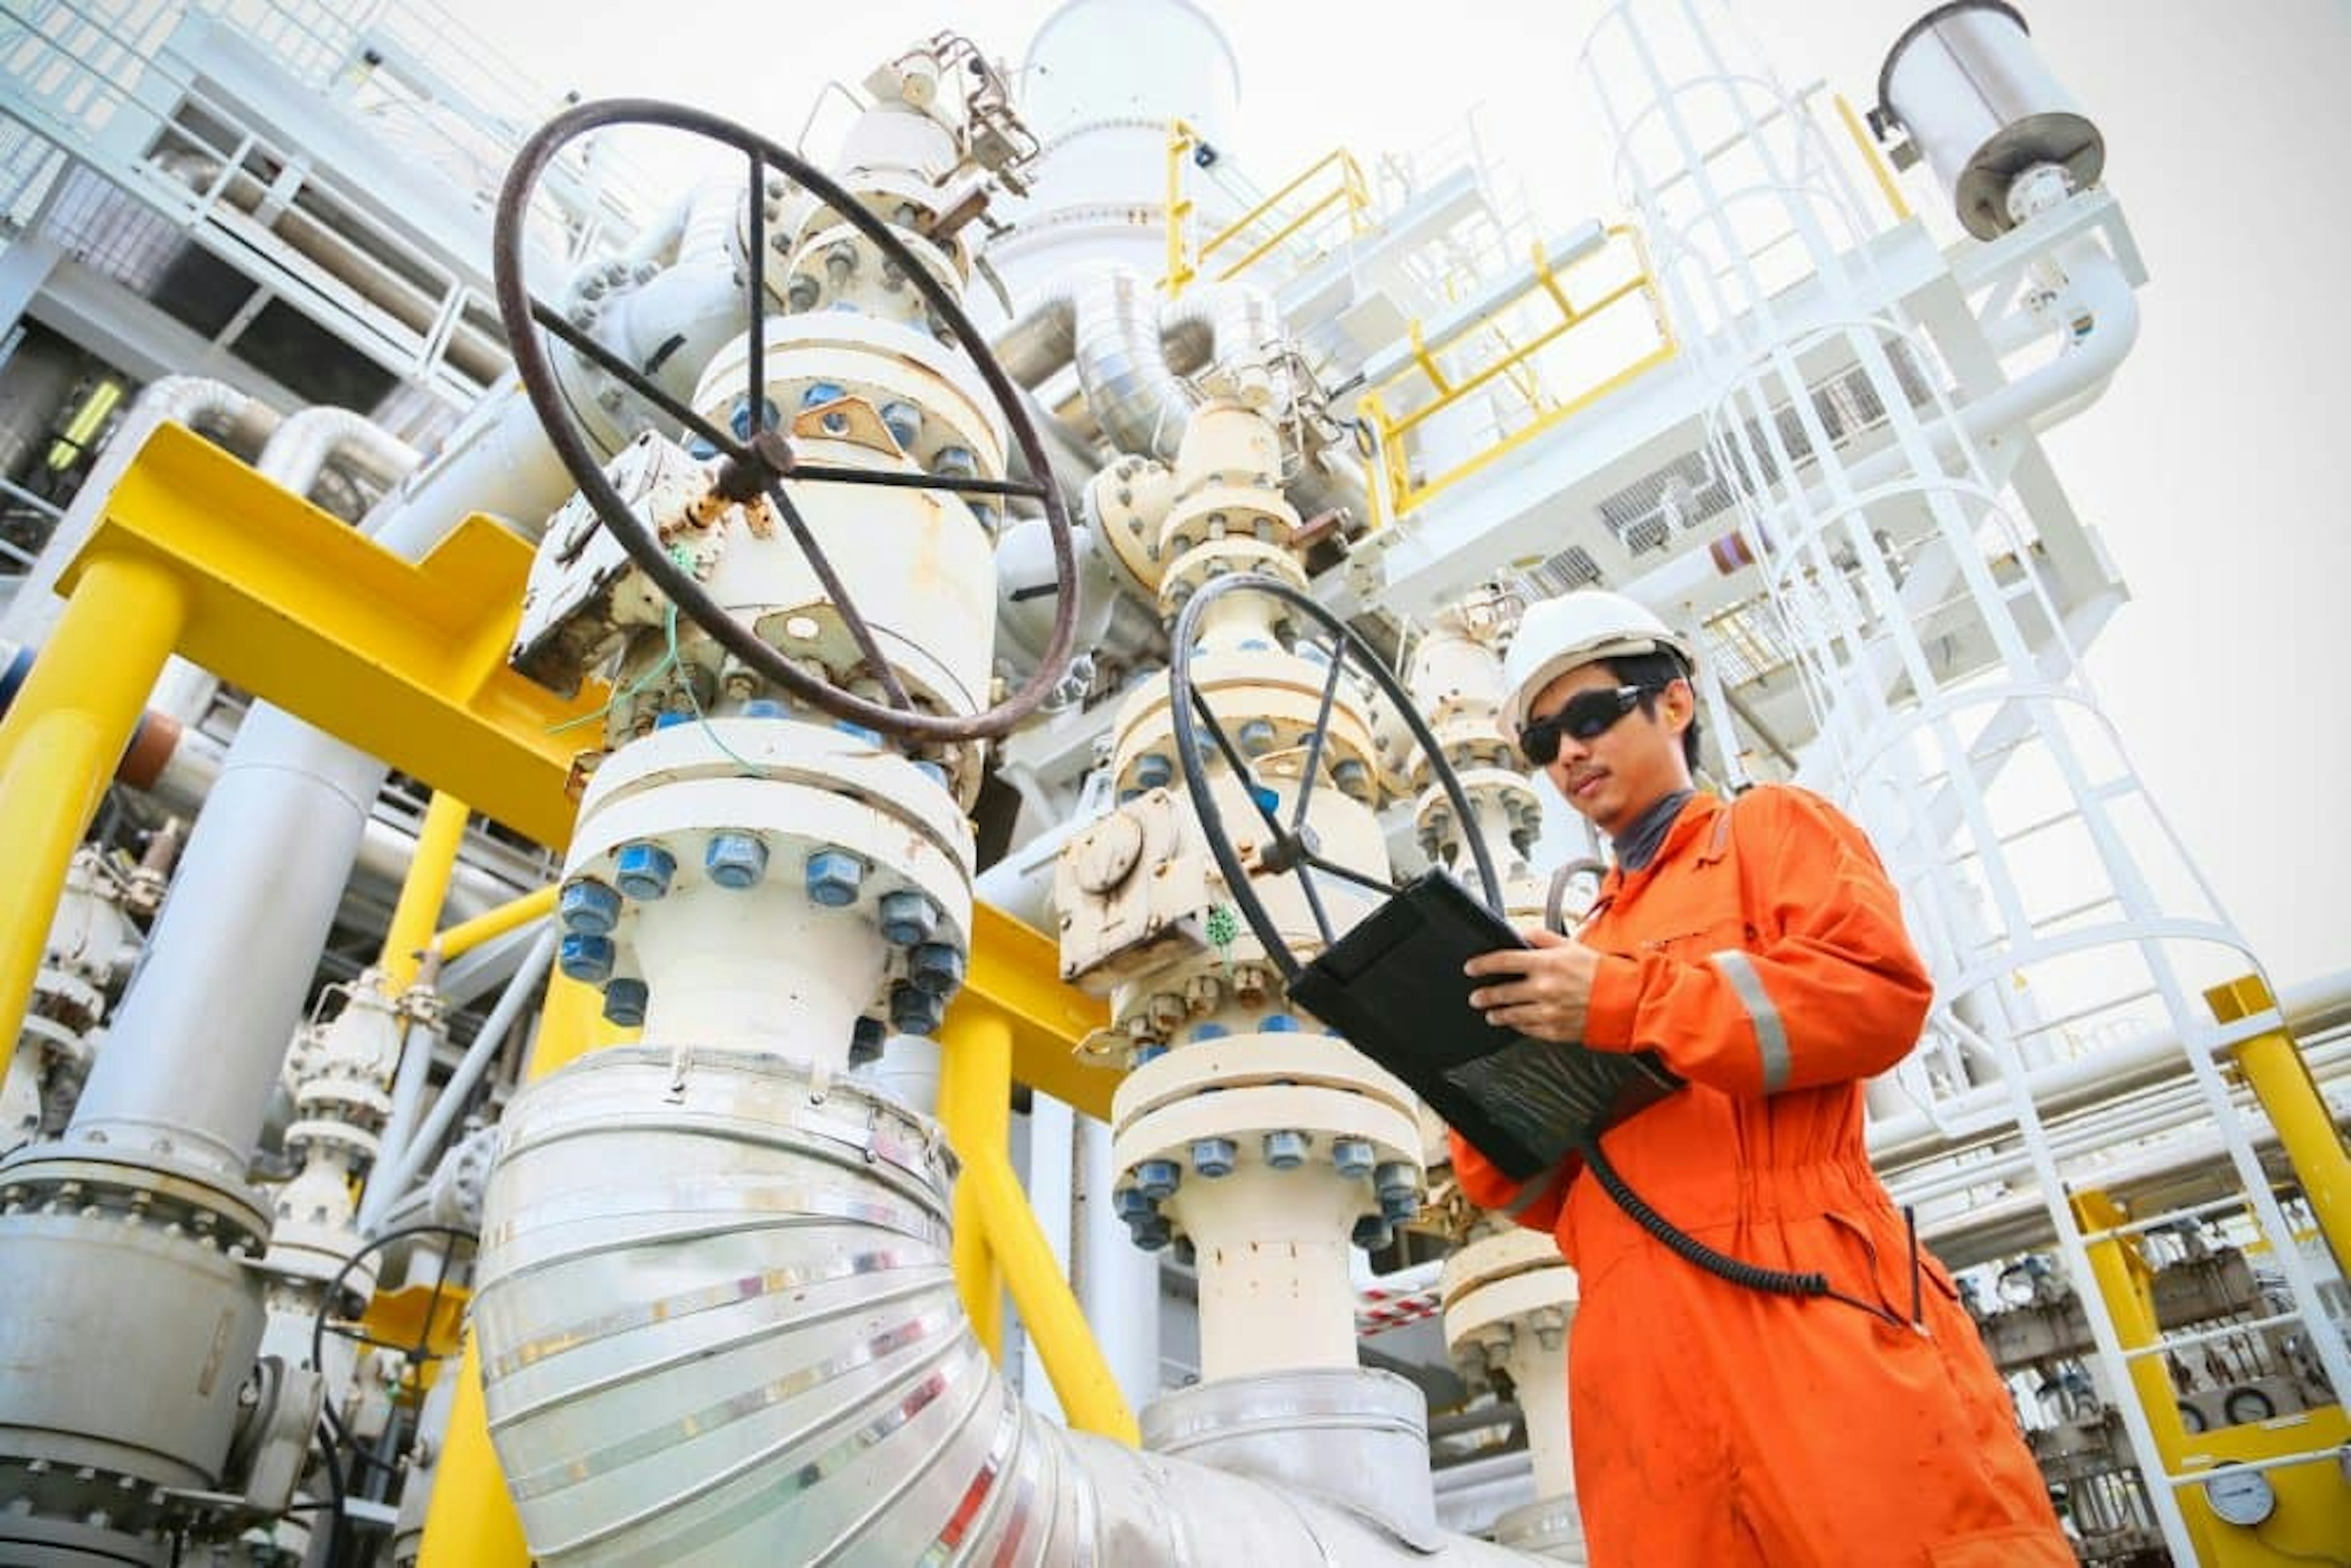 Engineer inspecting a site for conventional energy